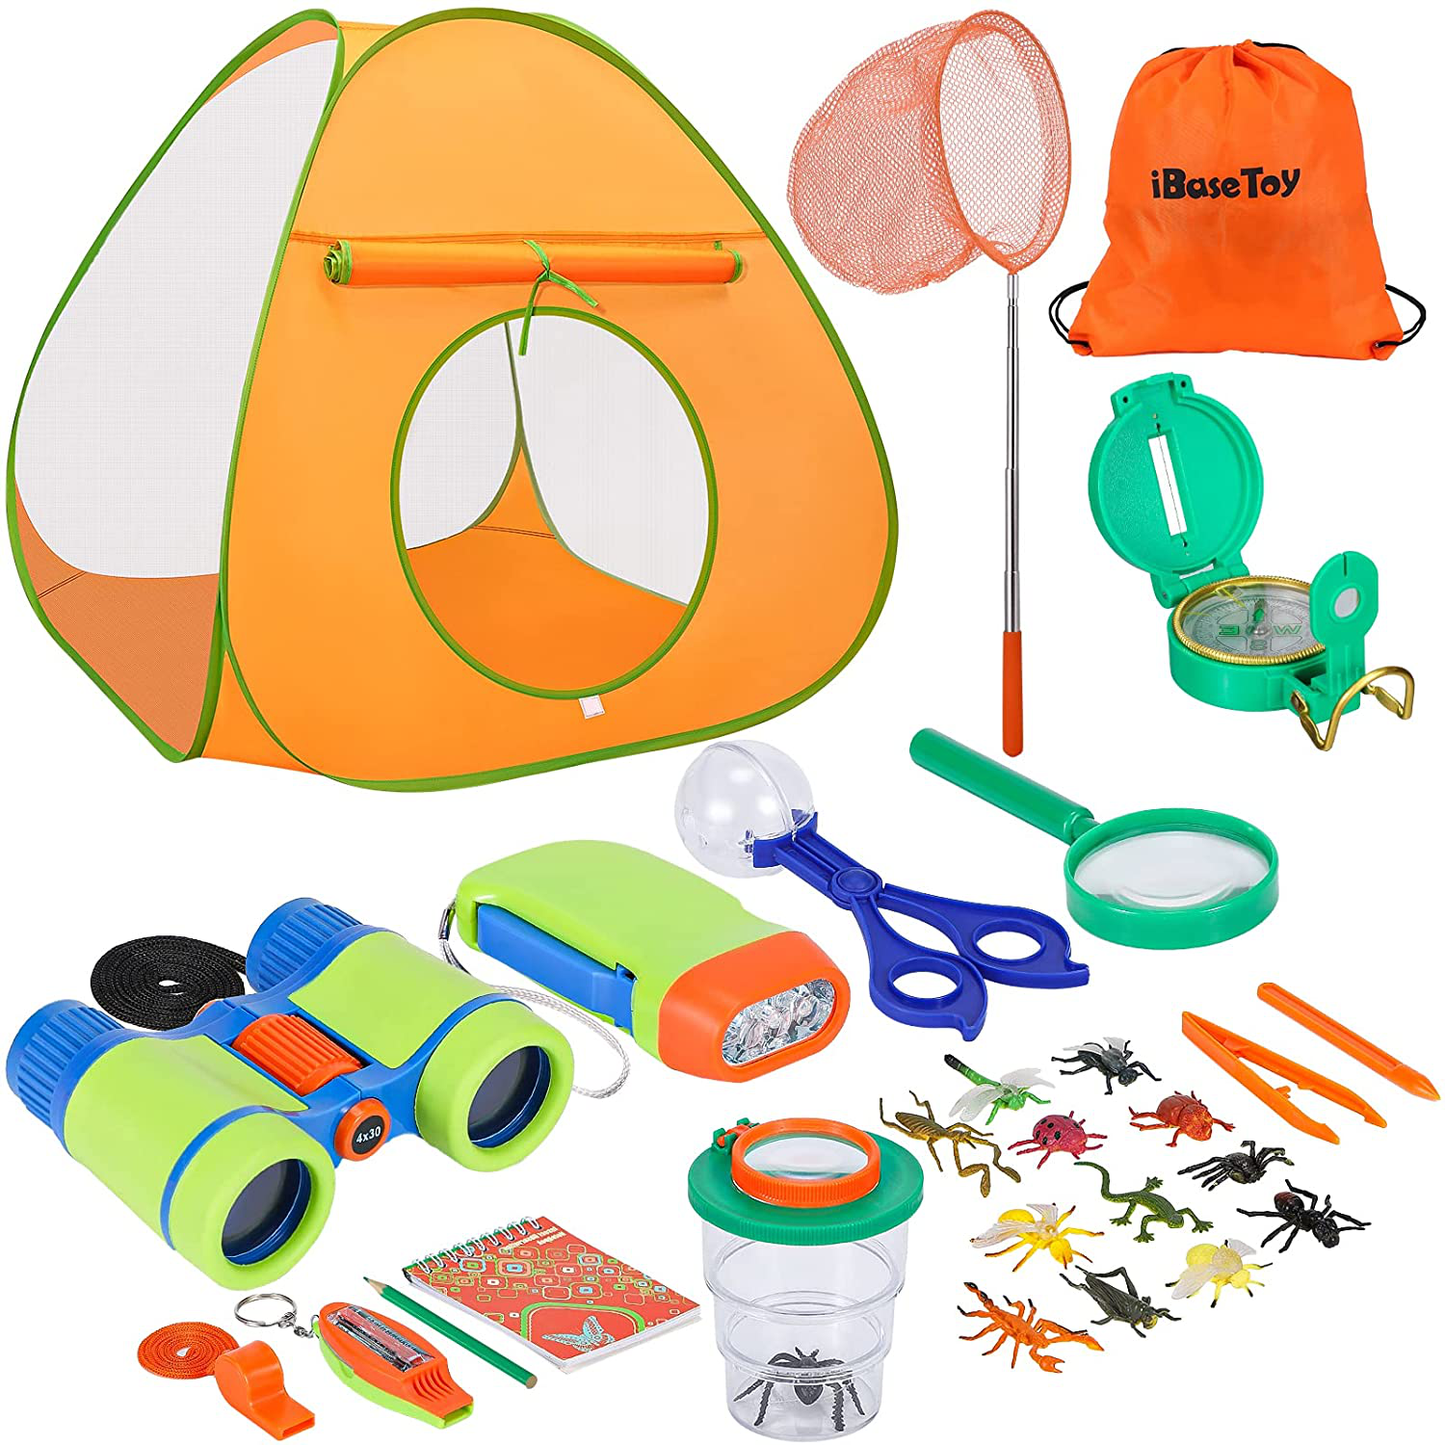 Ibasetoy Kids Camping Set with Tent 28 PCS - Camping Toys Adventure Kit for Kids Toddlers Boys - Including Binoculars, Compass, Flashlight, Bug Catching Kit, Camping Tent and Etc